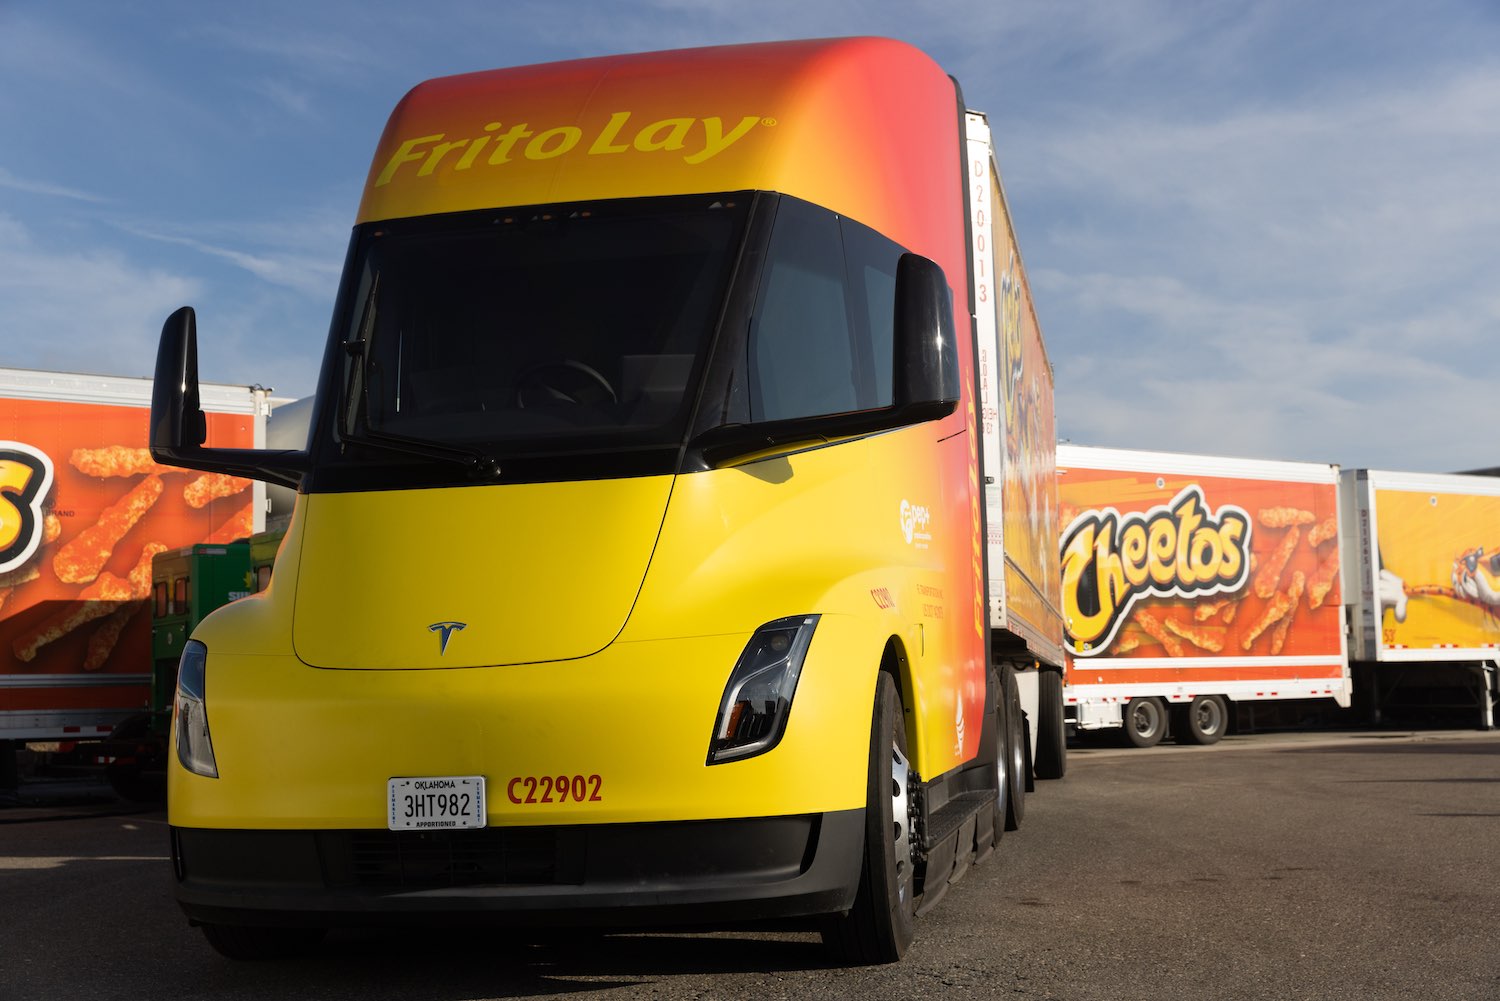 A bright yellow and orange Tesla semi truck tractor in front of a Cheetohs trailer in a parking lot.